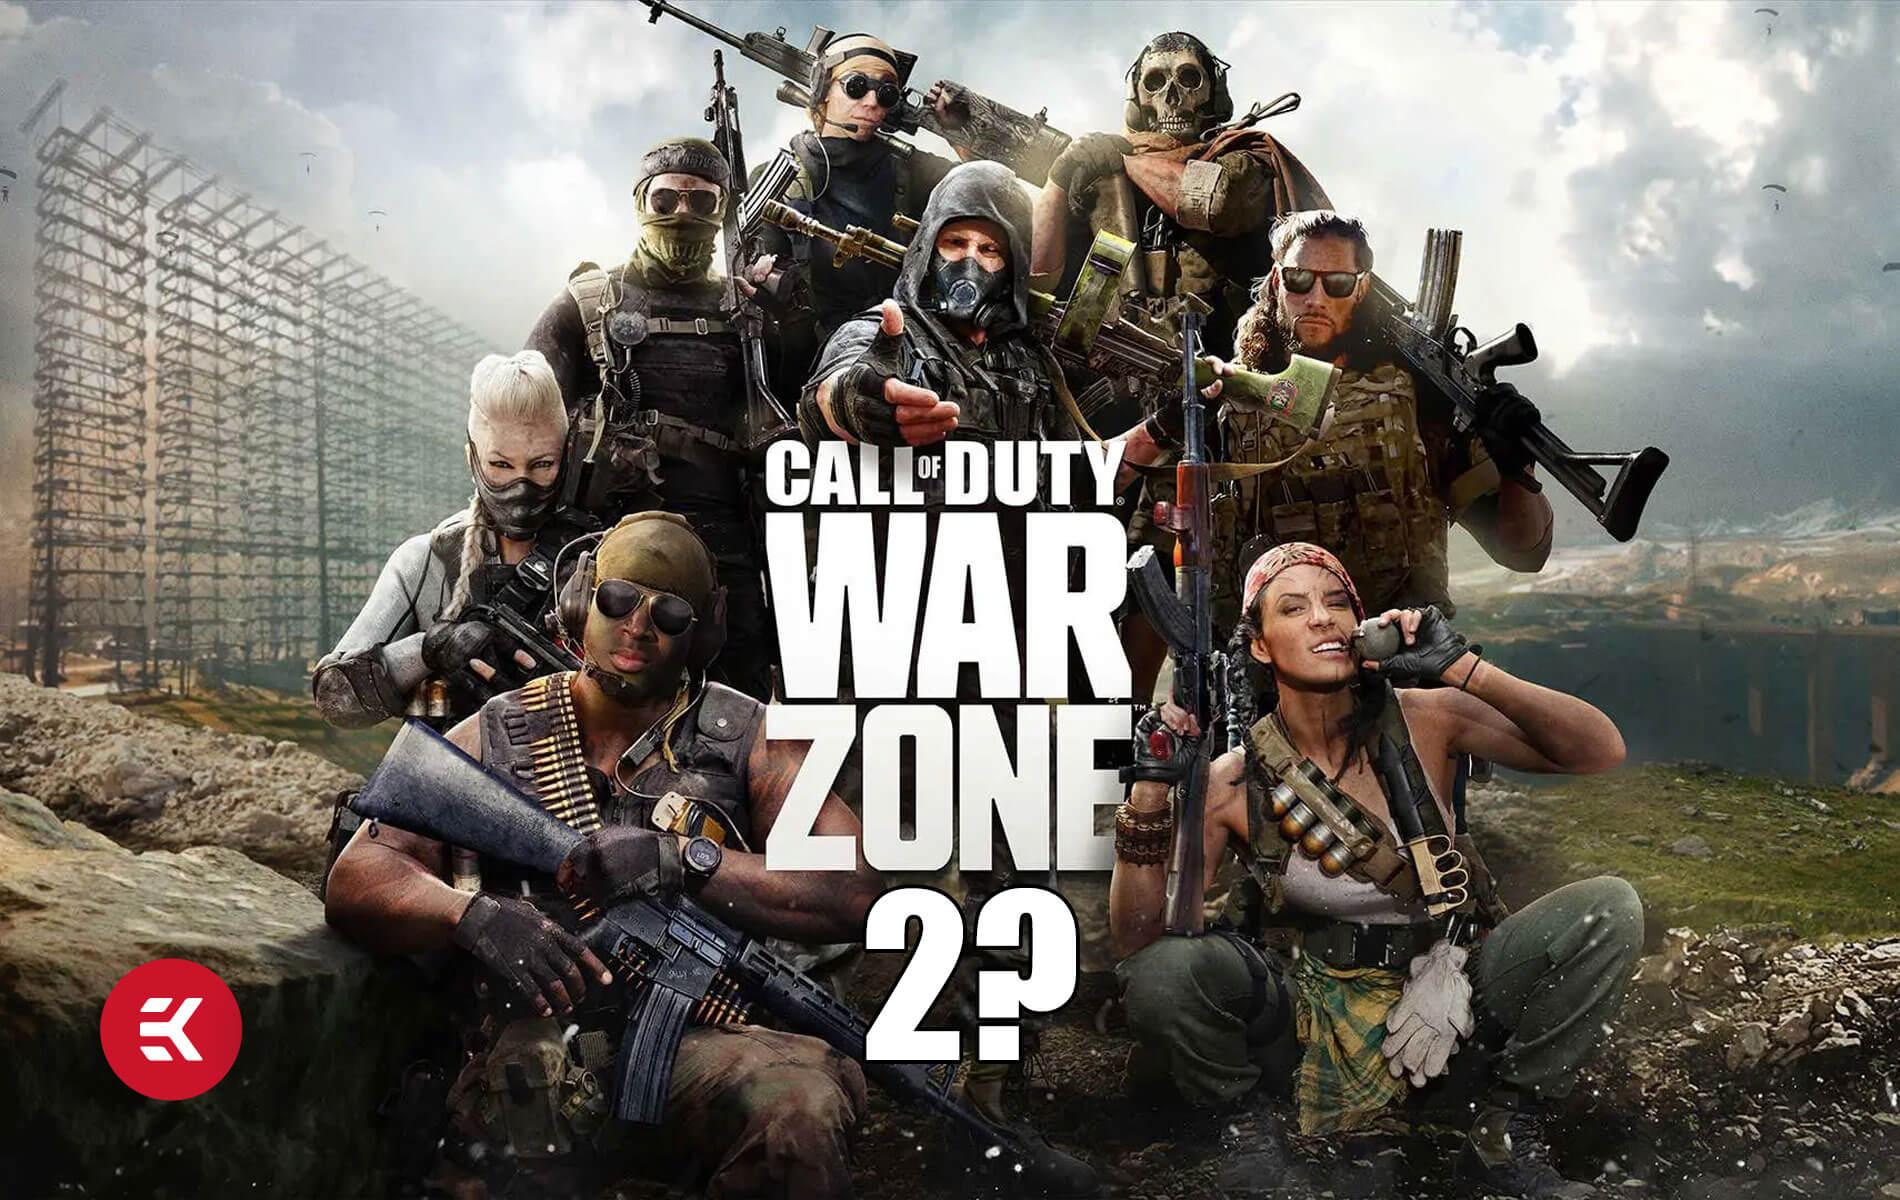 Call of Duty Warzone 2 